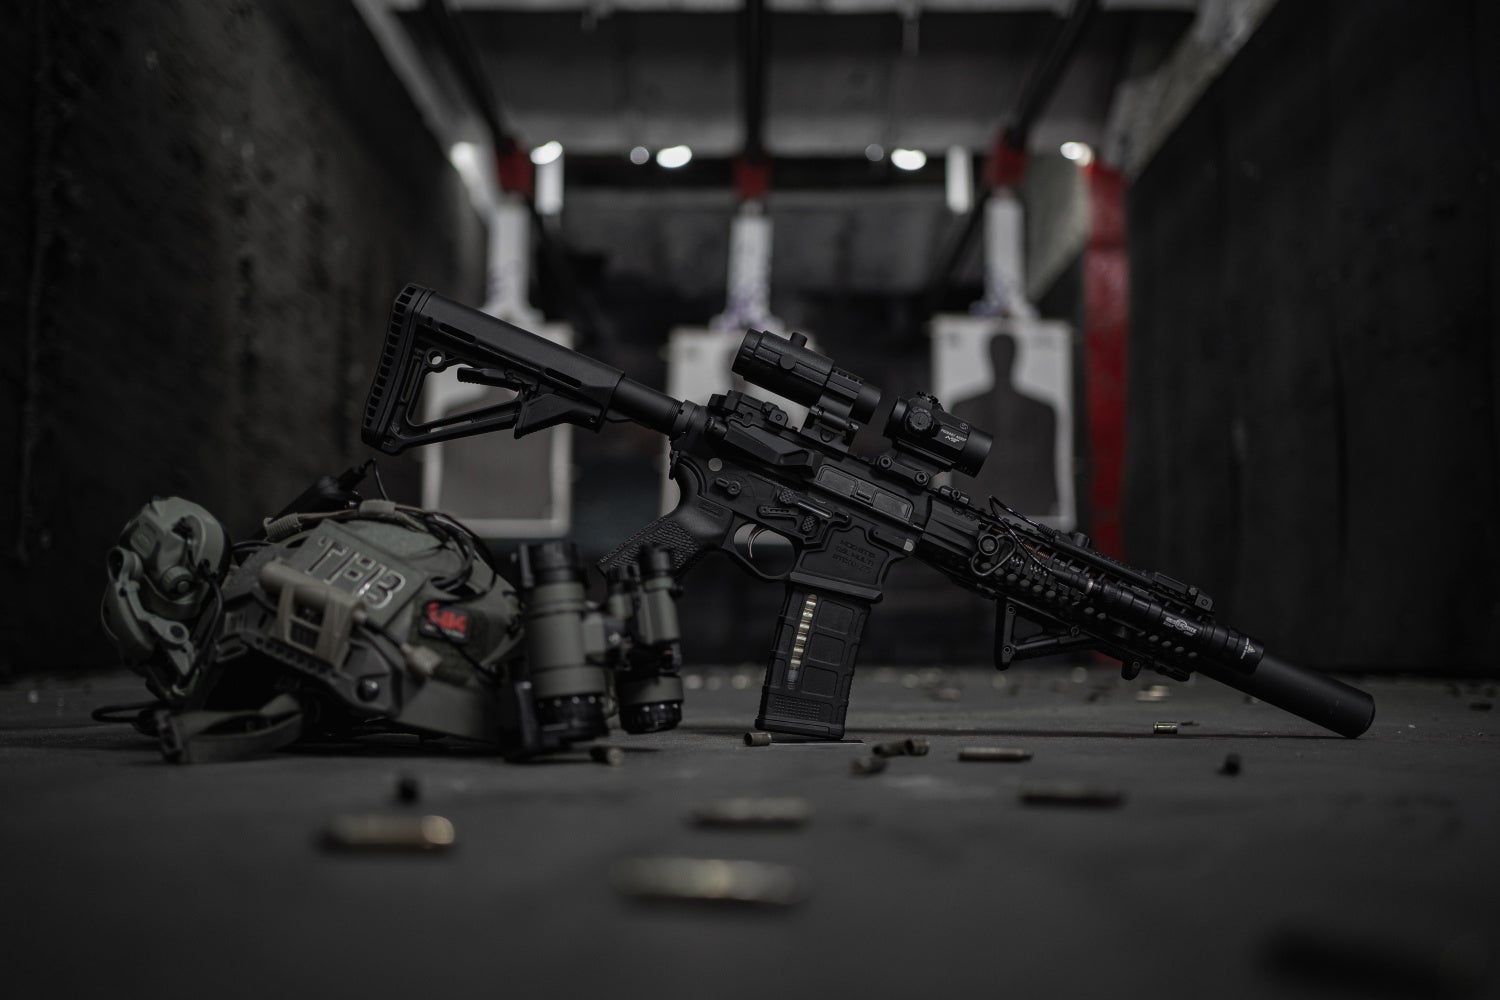 SILENCER SATURDAY #159: The Spike’s Tactical Compressor - Credit: Ryan Ogborn 